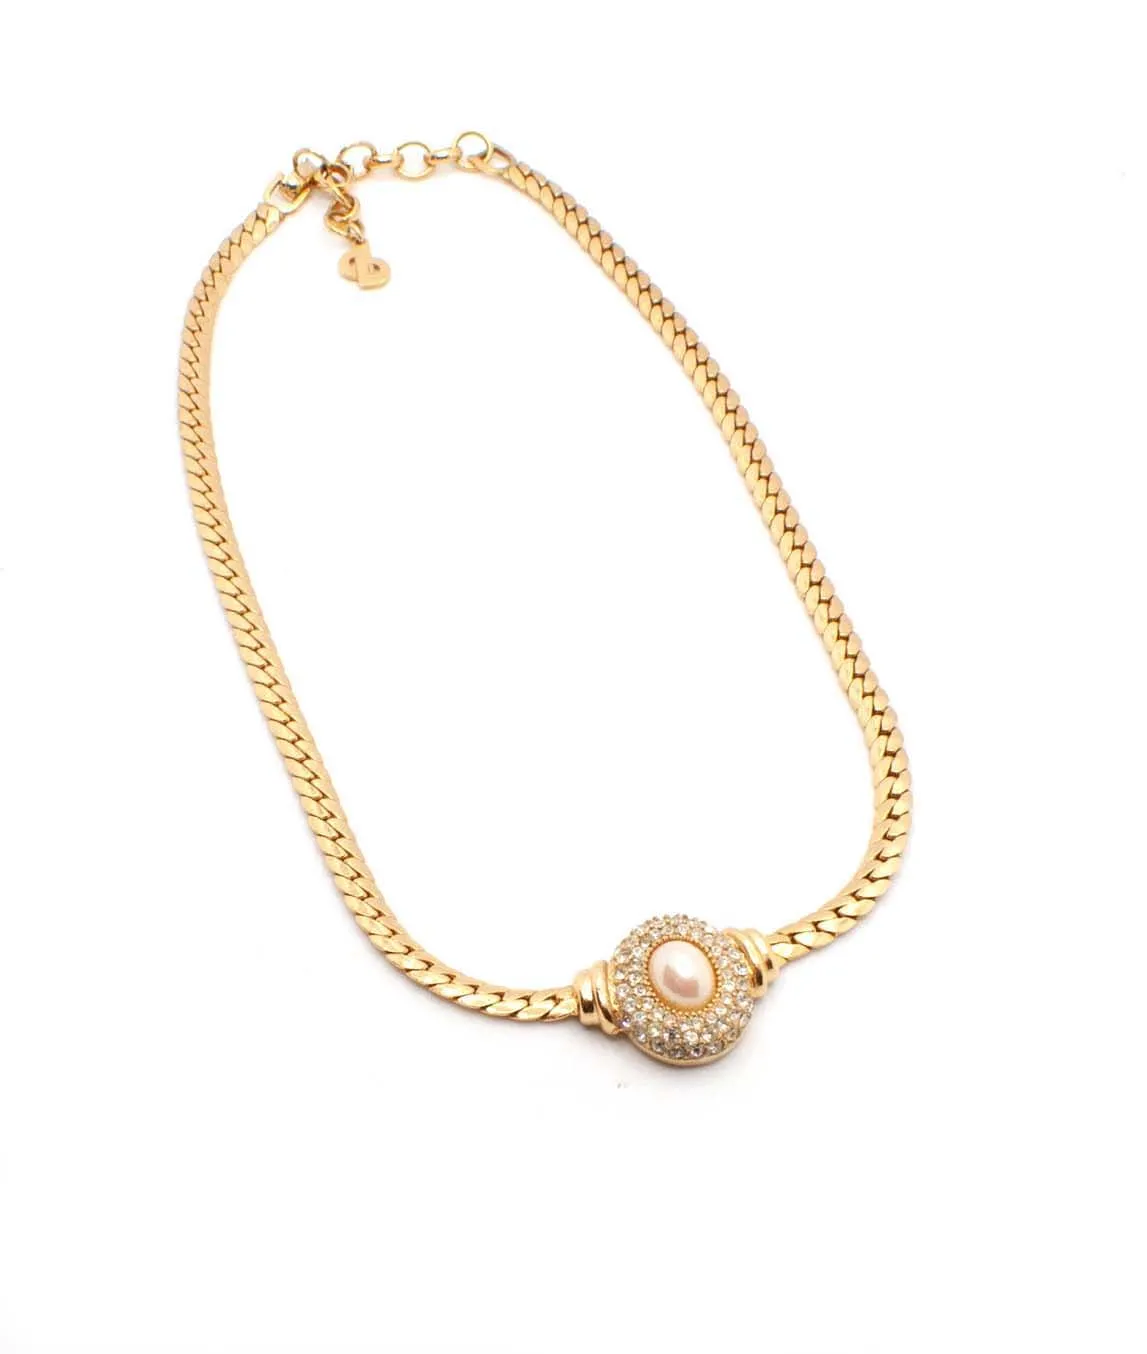 Christian Dior flat chain necklace with rhinestones and iridescent pearl